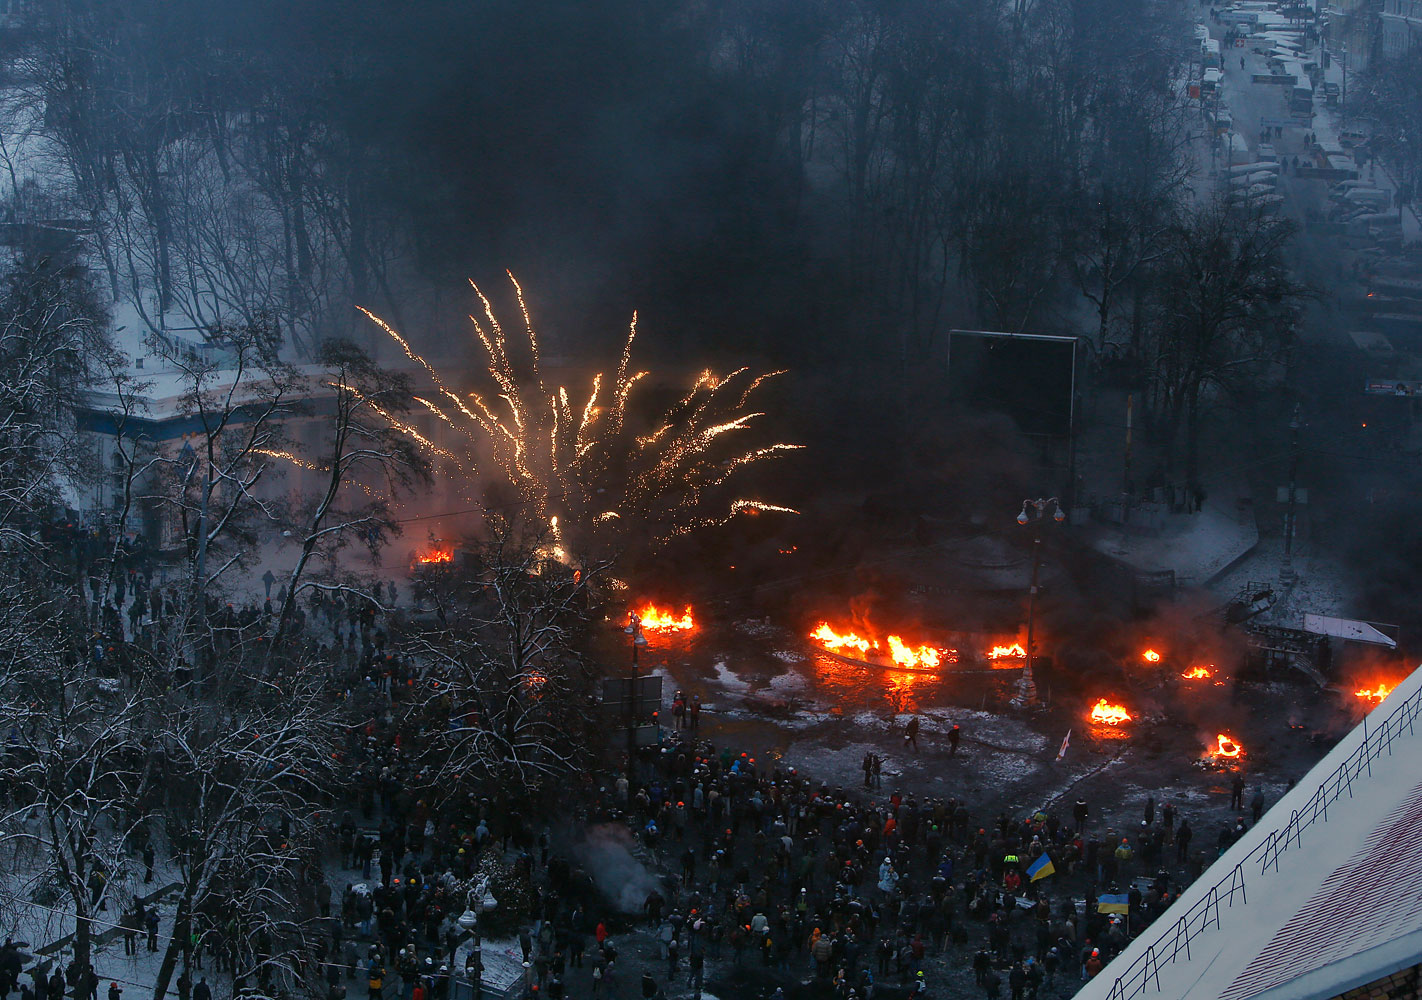 Tyres burn in the street, set alight by protesters in clashes with police in central Kiev, Jan. 22, 2014.